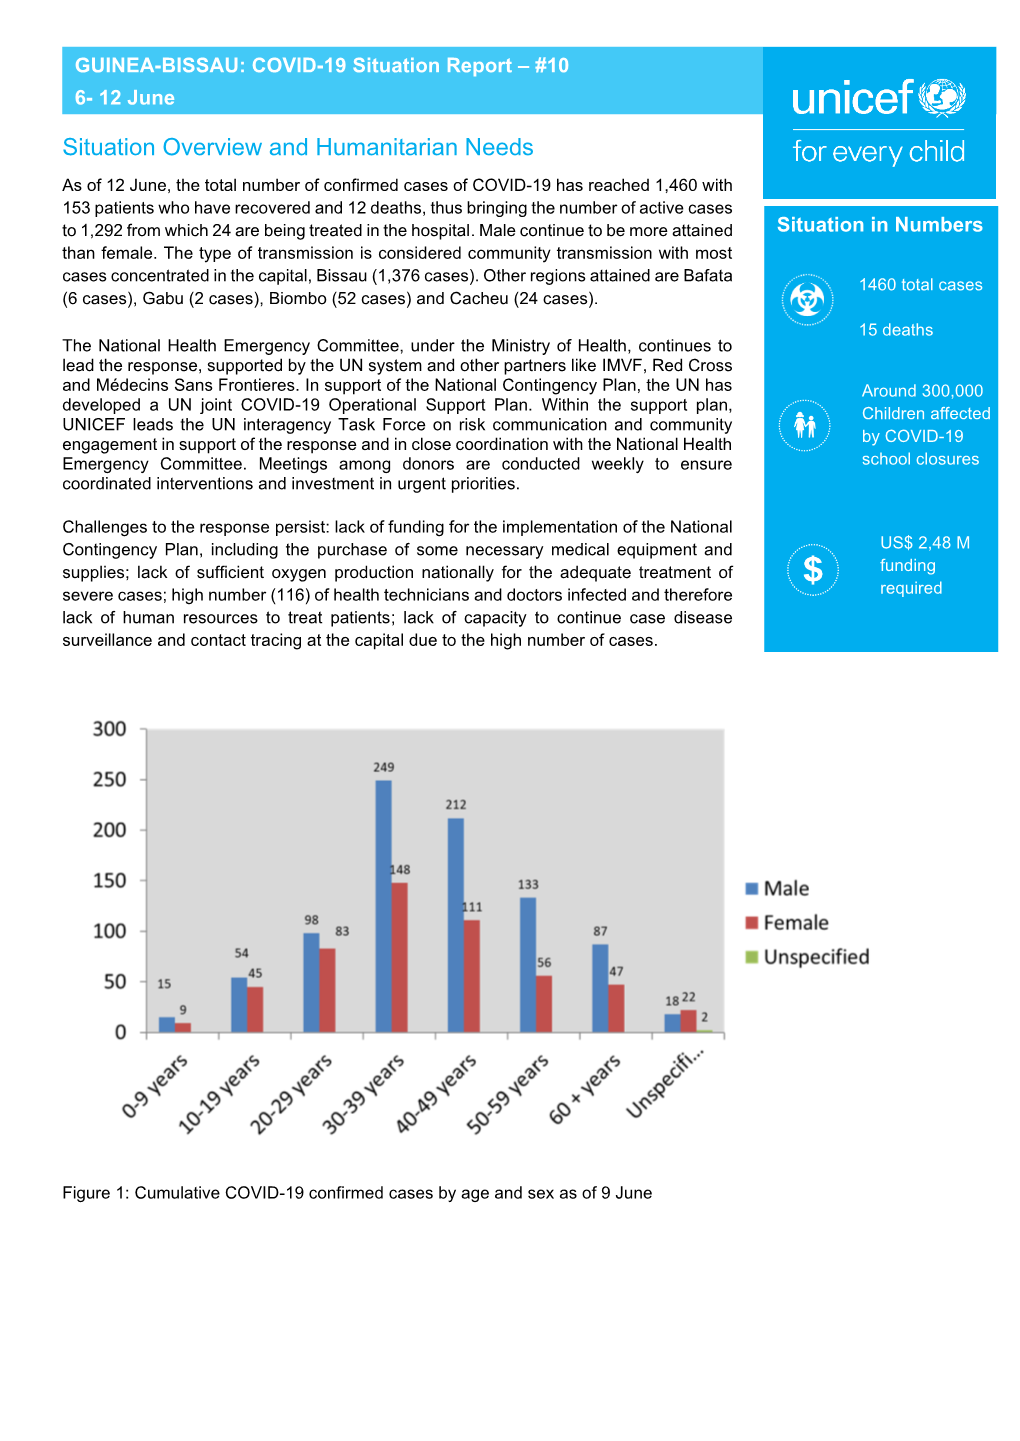 Situation Overview and Humanitarian Needs